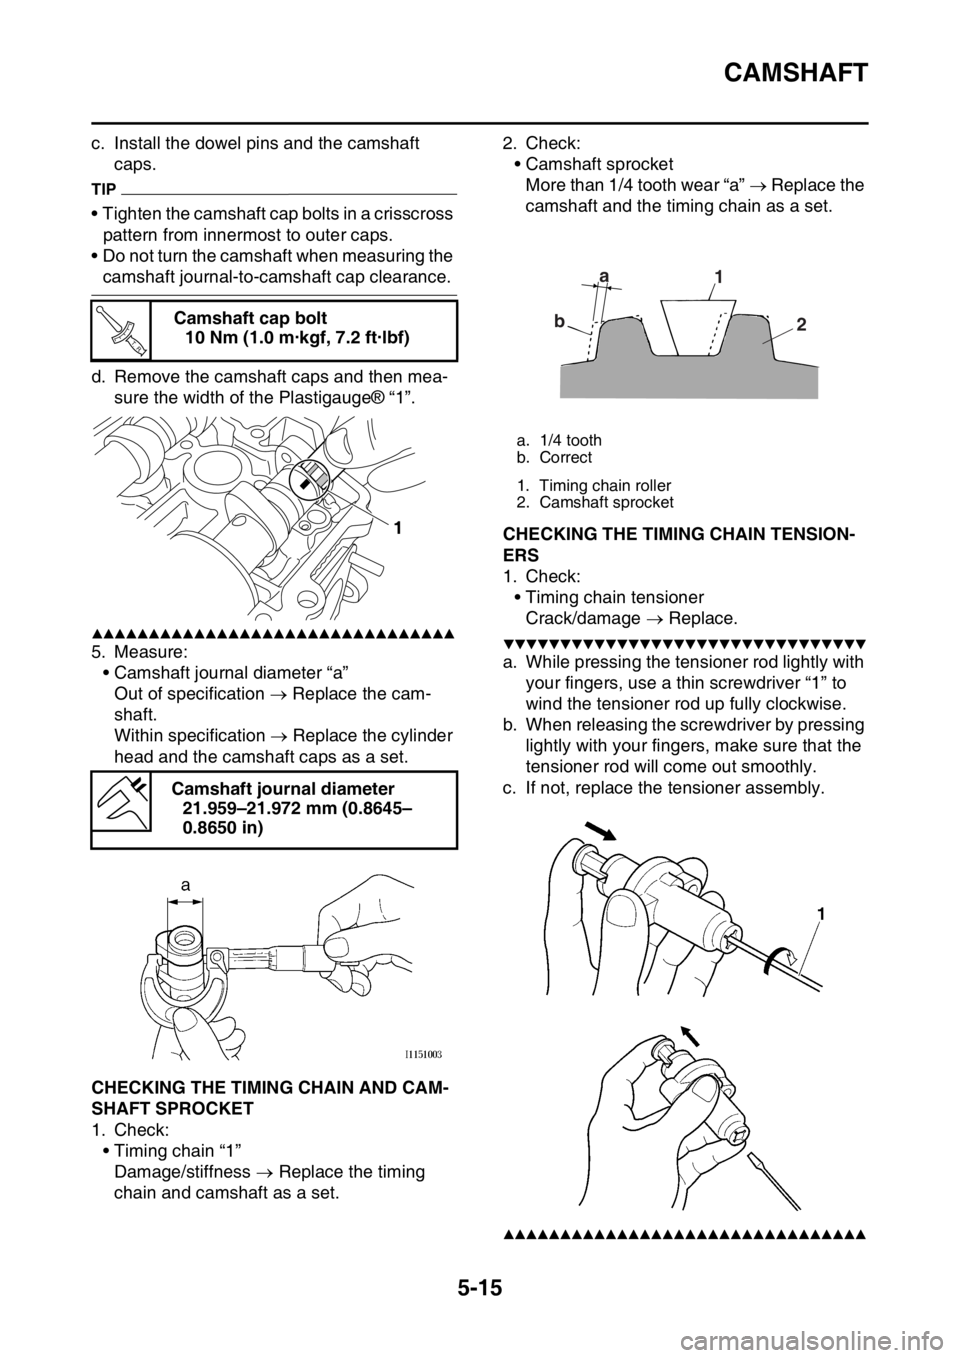 YAMAHA YZ250F 2015  Owners Manual CAMSHAFT
5-15
c. Install the dowel pins and the camshaft 
caps.
TIP
• Tighten the camshaft cap bolts in a crisscross 
pattern from innermost to outer caps.
• Do not turn the camshaft when measurin